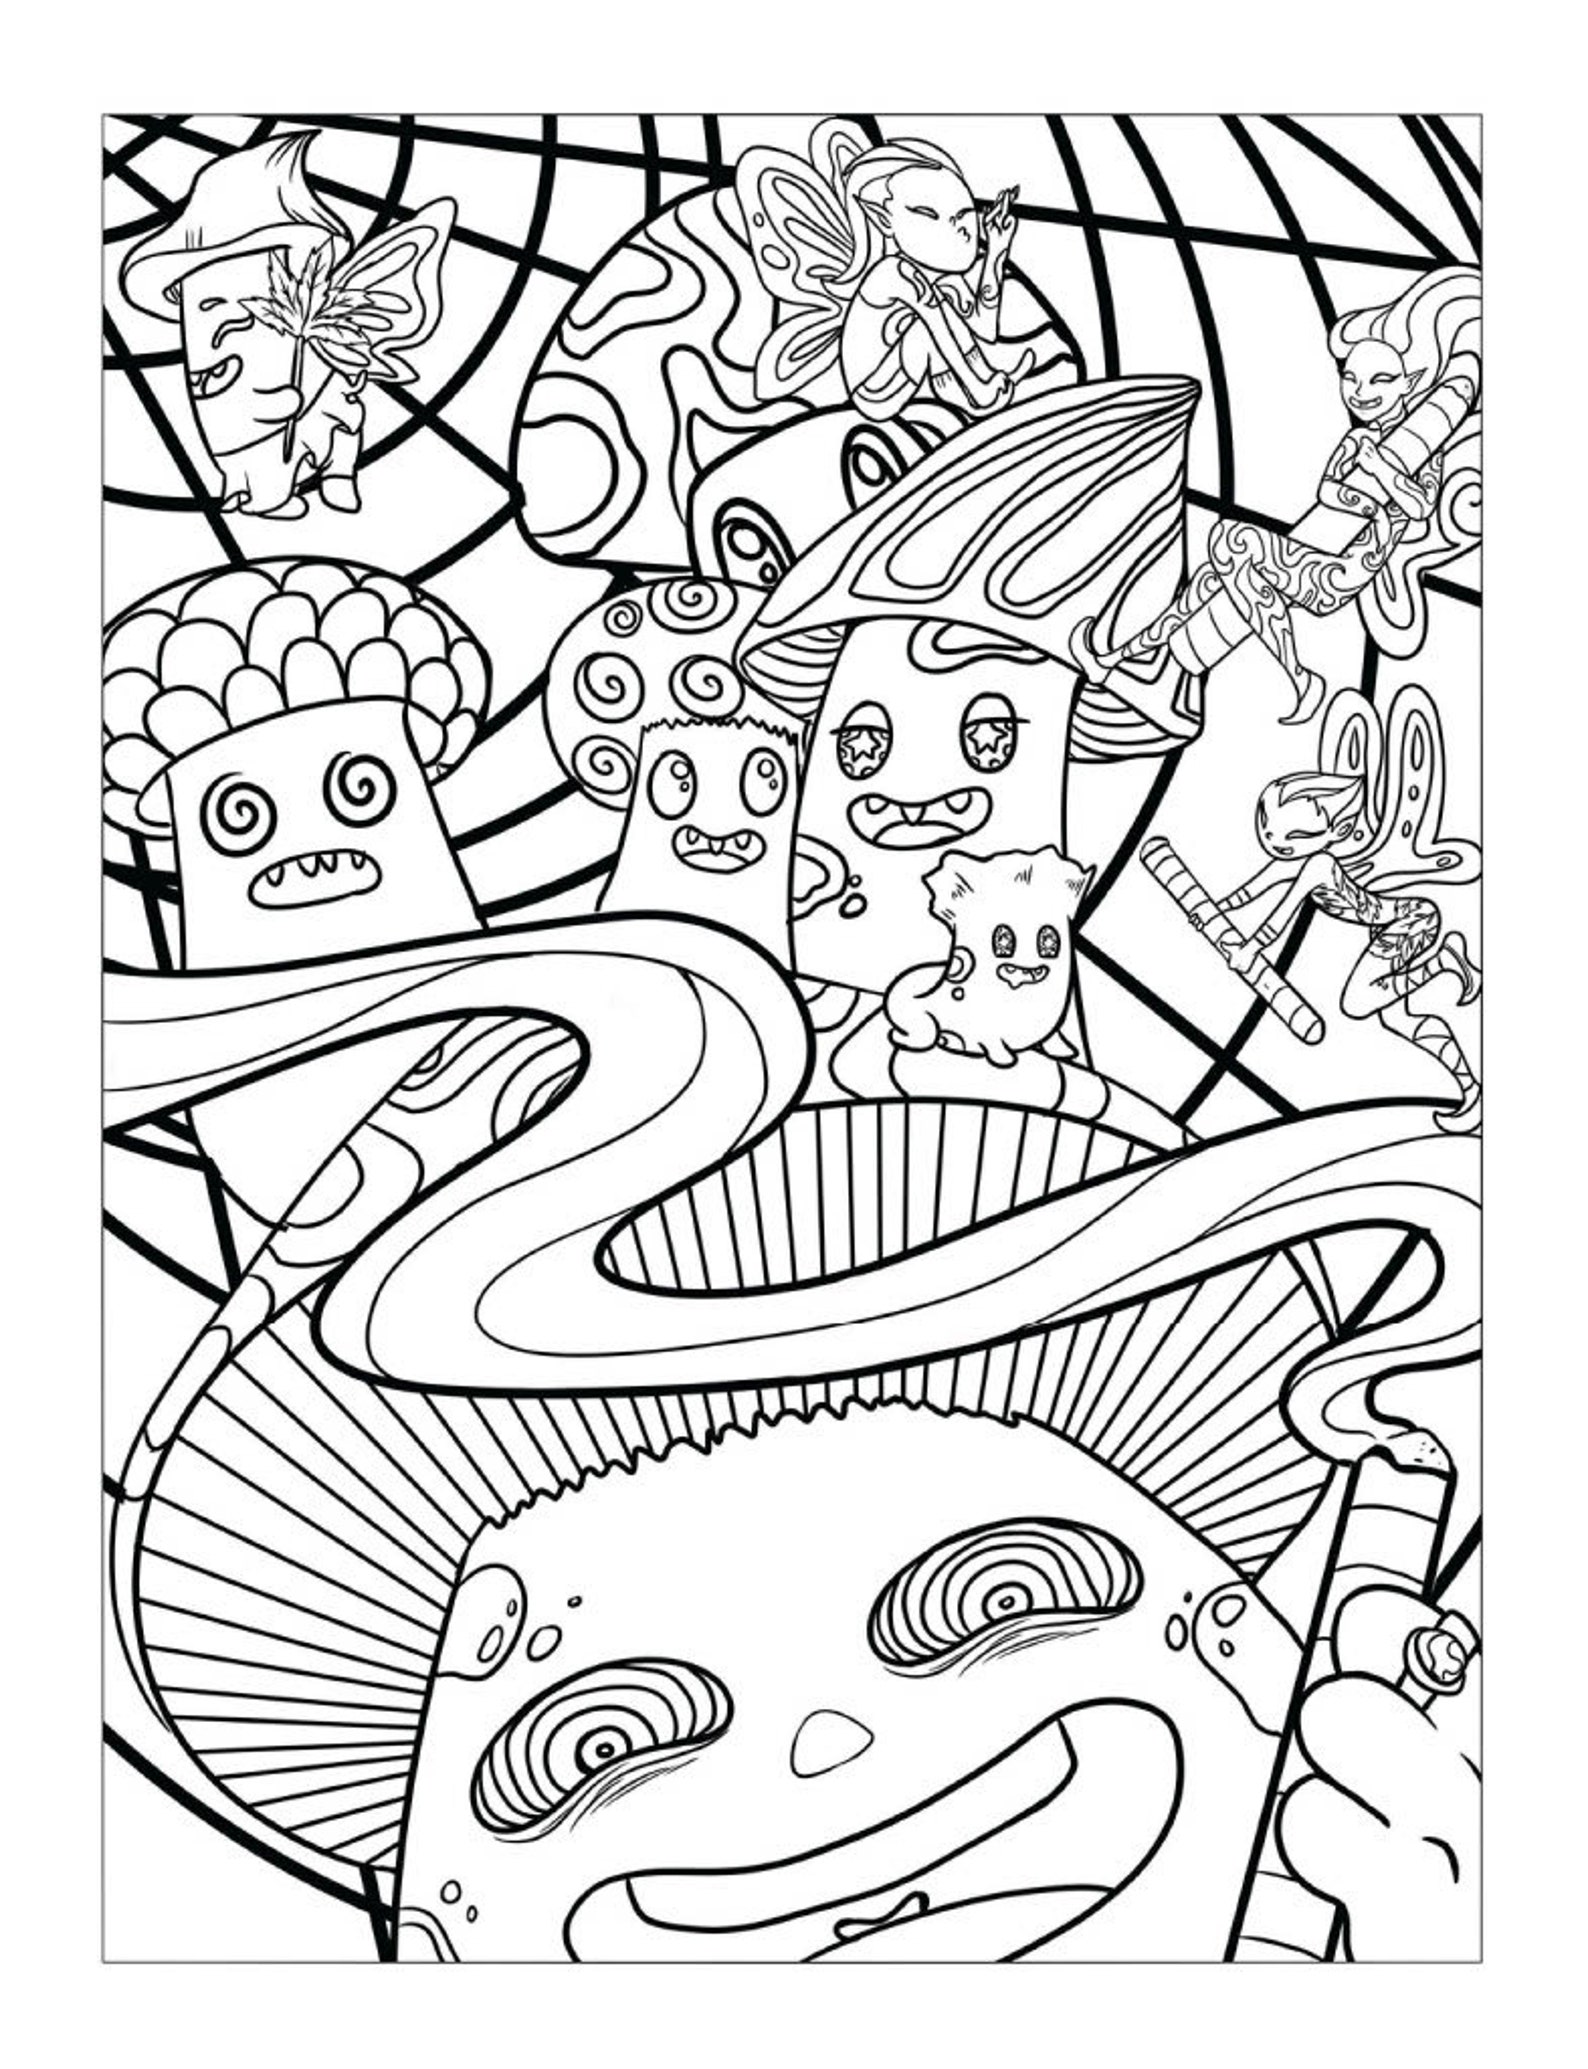 30-page-psychedelic-trippy-adult-coloring-book-digital-etsy-espa-a